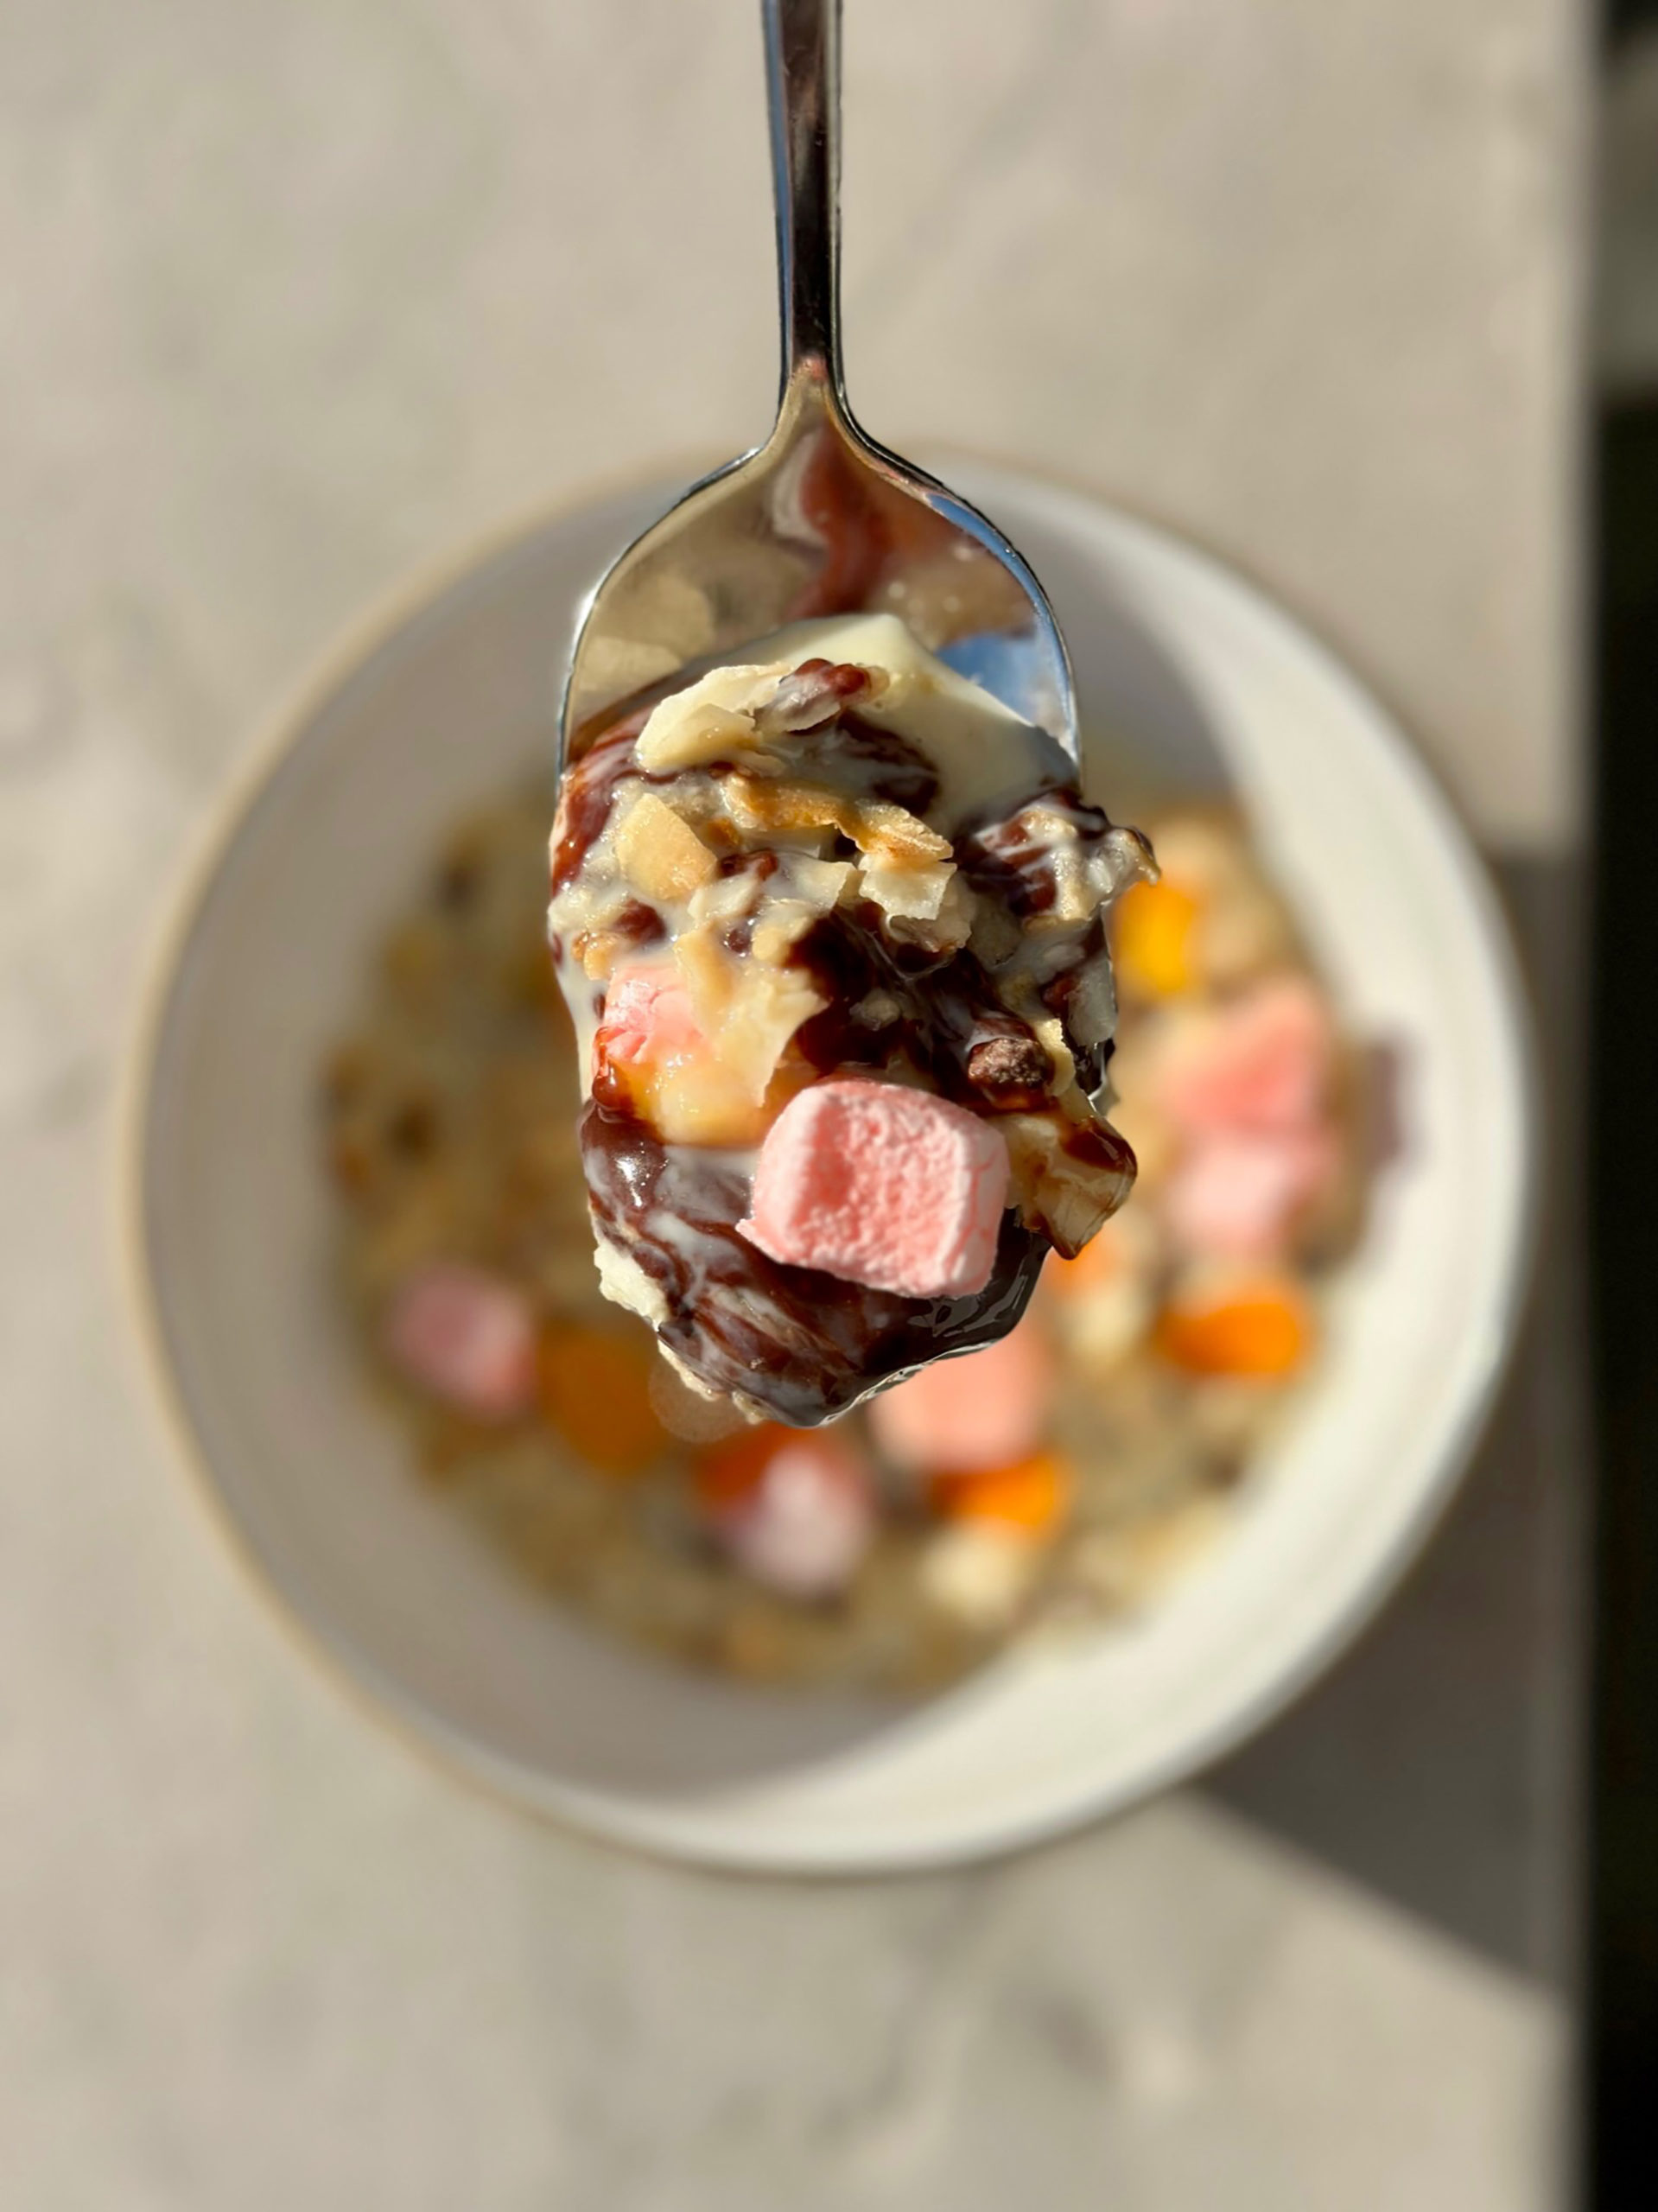 a scoop of pink and orange dessert on a spoon